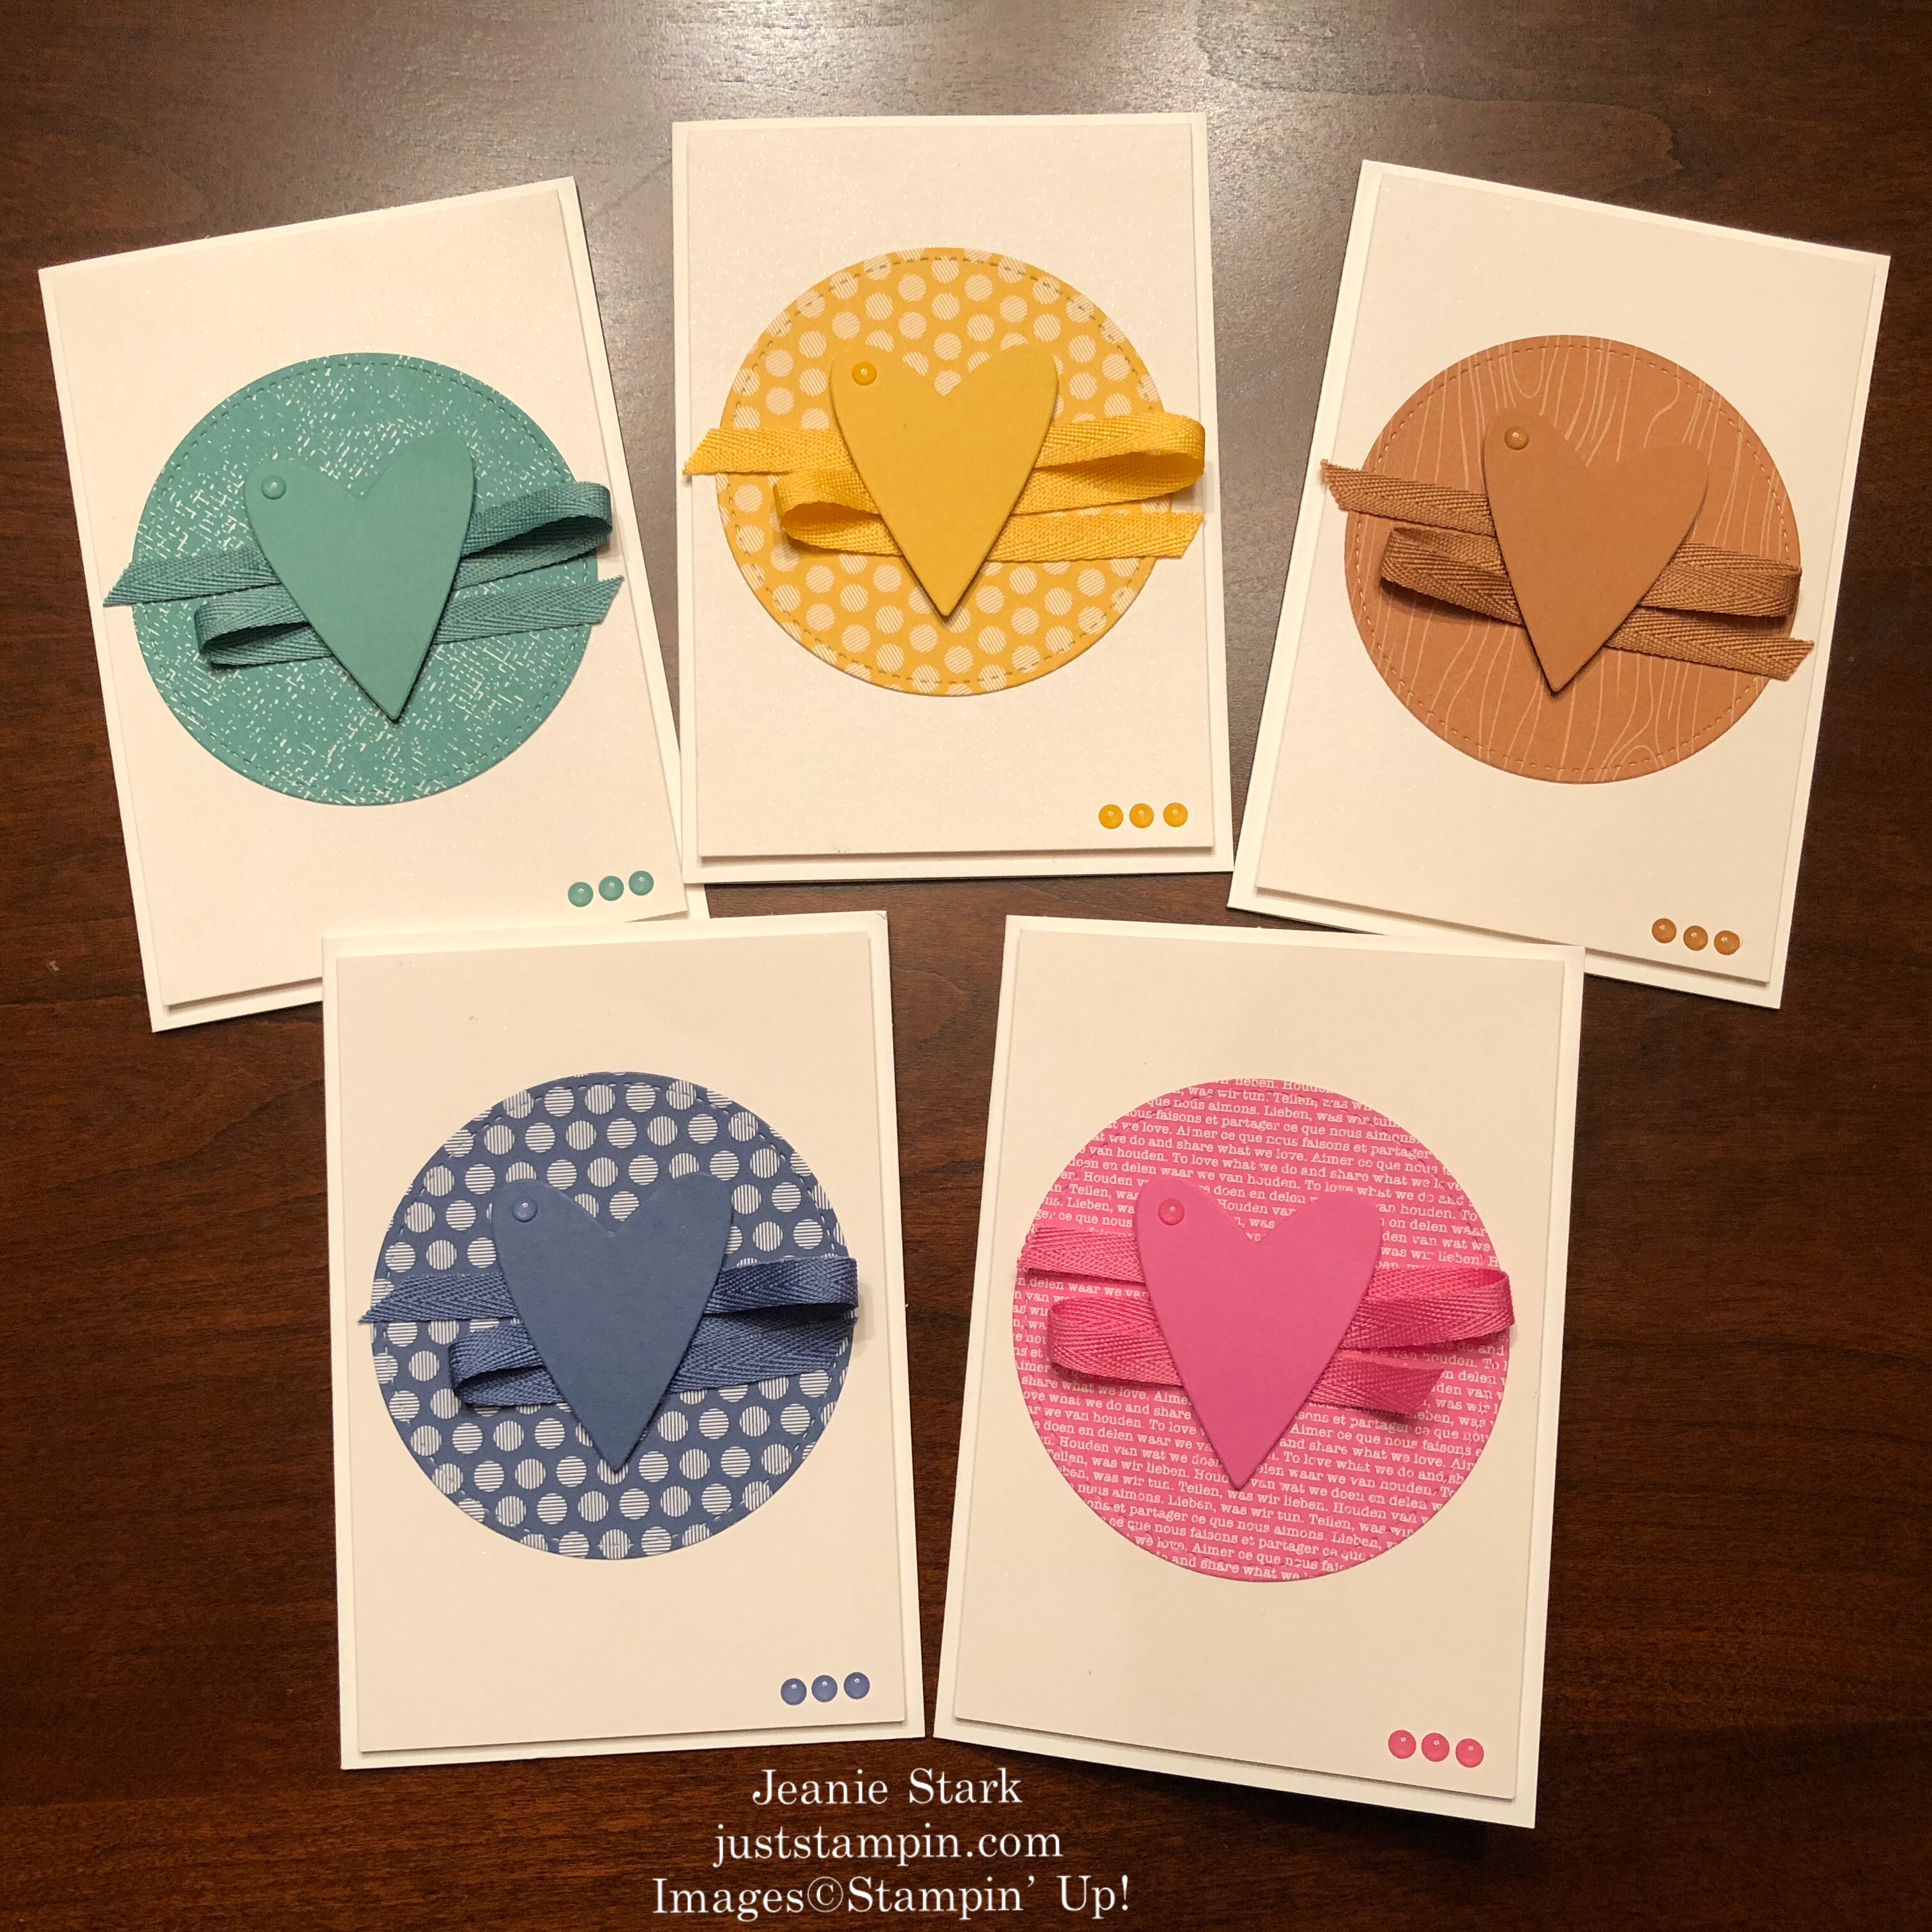 Stampin' Up! 2020-2022 In Color note cards for any occasion - Jeanie Stark StampinUp